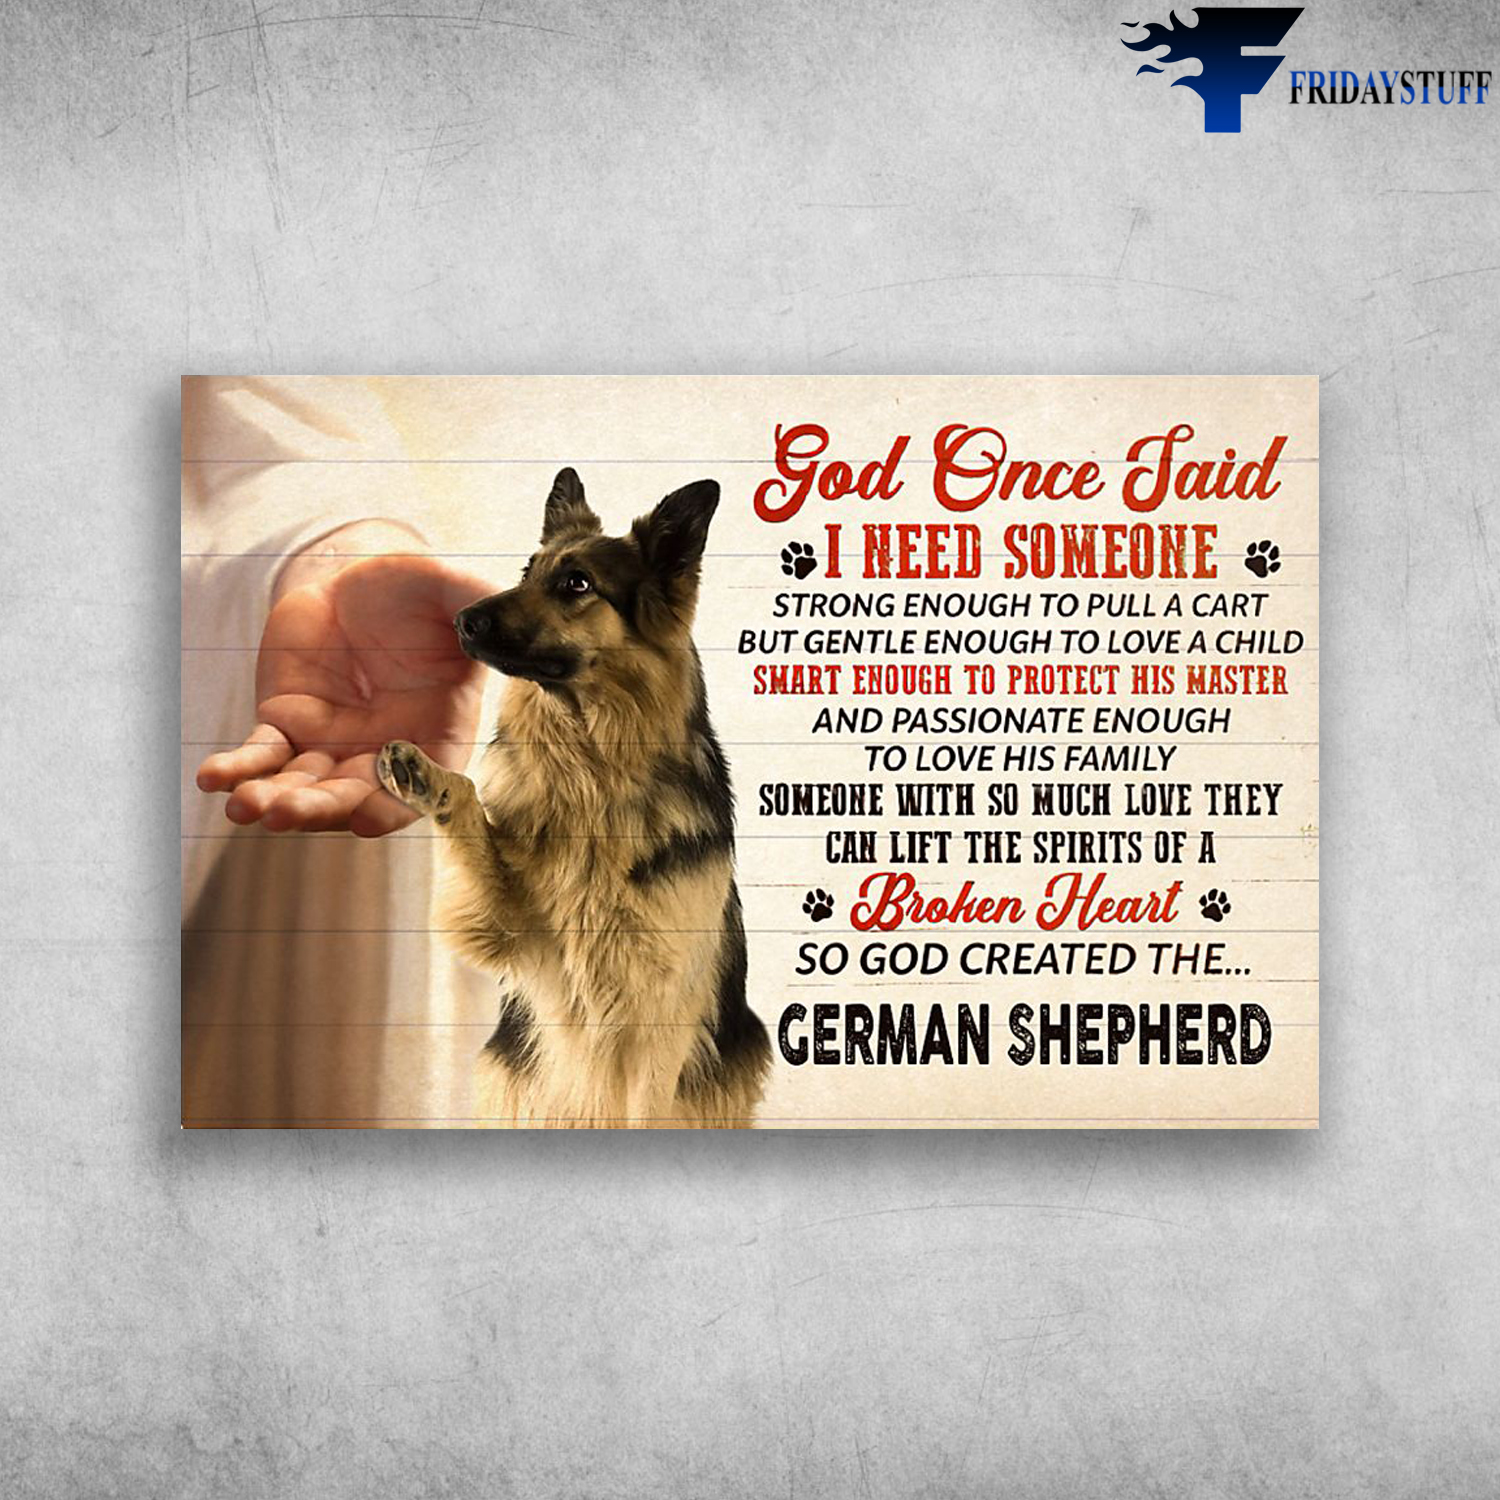 German Shepherd And God - God Once Faid, I Need Someone Strong Enough To Pull A Cart, But Gentle Enough To Love A Child, Smart Enough To Protect His Master, Broken Heart, So God Created The German Shepherd